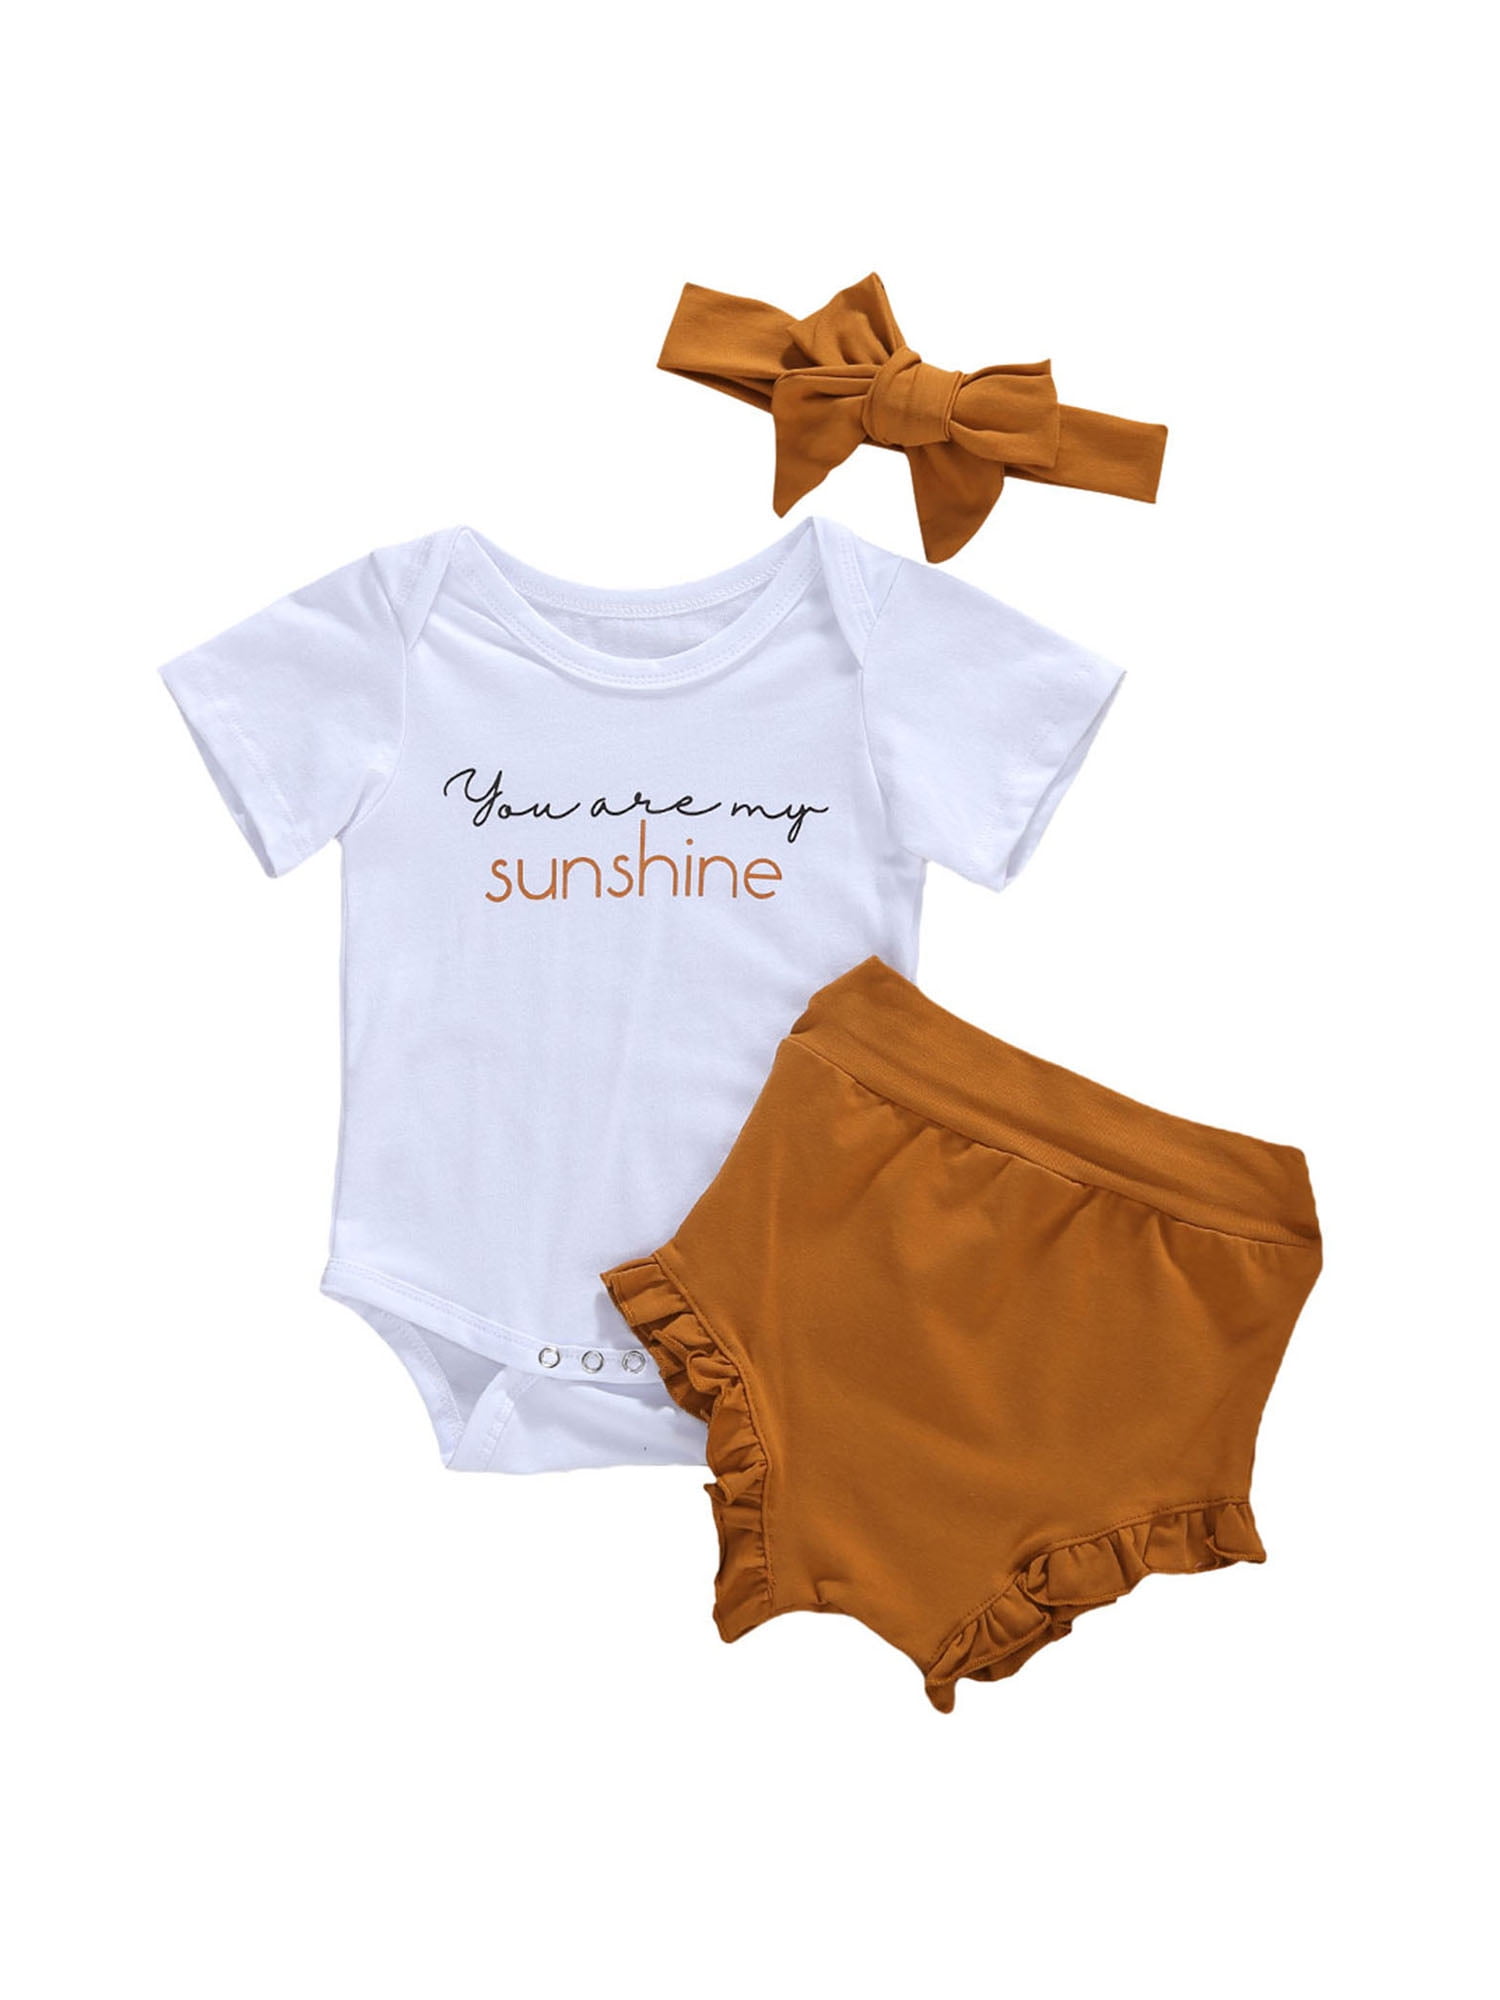 Nursery Rhyme Baby Clothing Summer Baby Clothes Baby Shower Gift Cute Baby Outfit You Are My Sunshine My Only Sunshine Baby Bodysuit